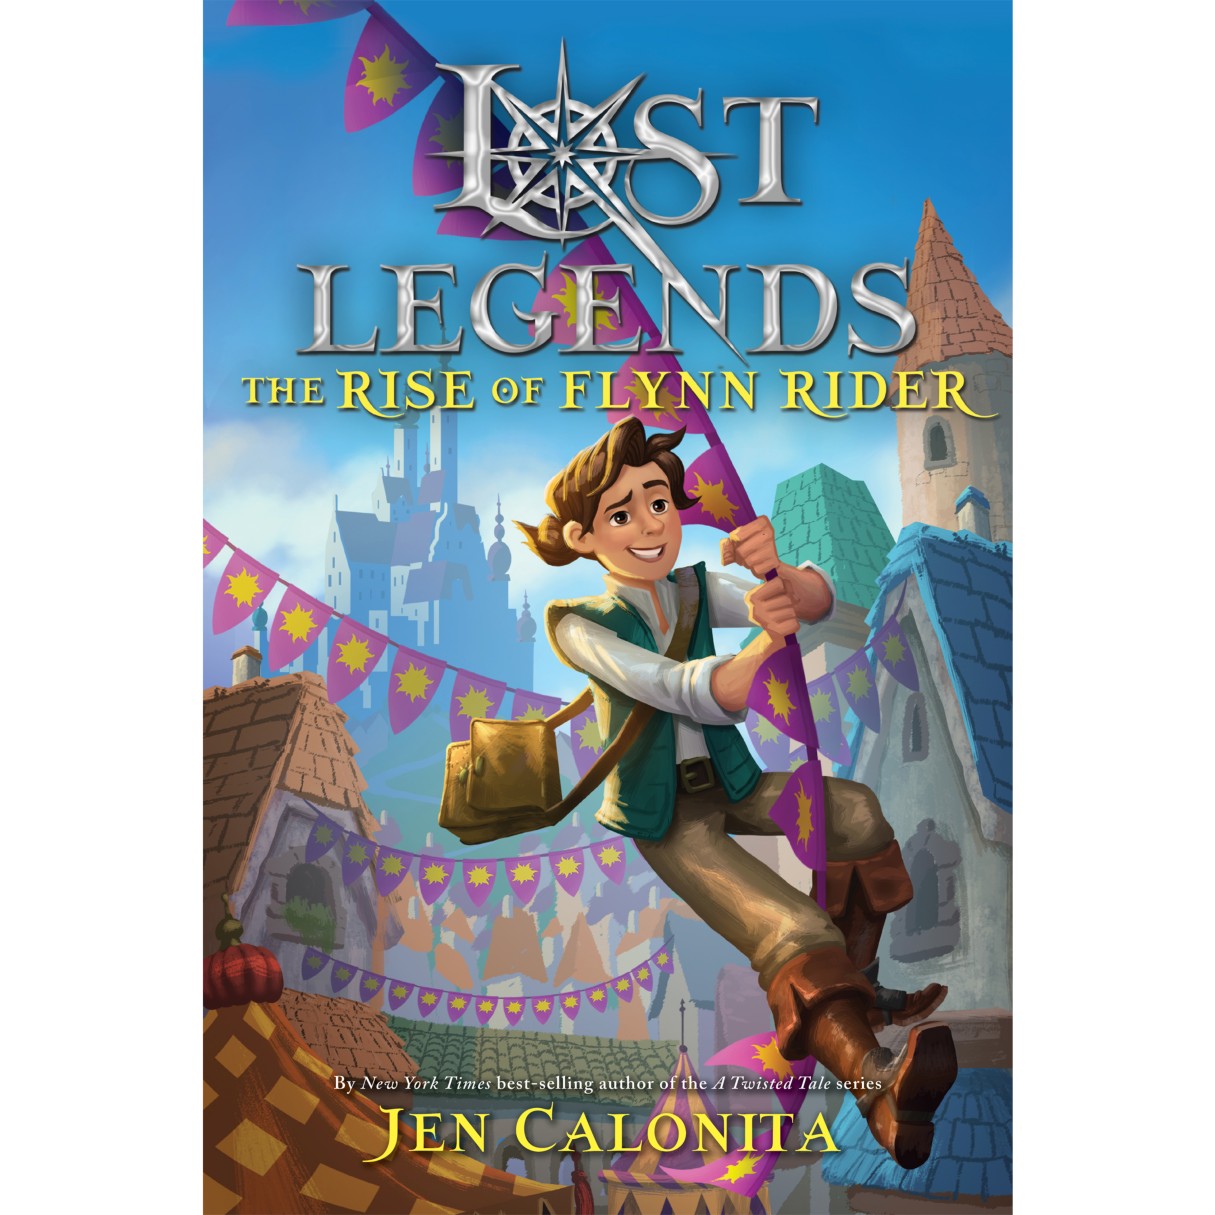 Lost Legends: The Rise of Flynn Rider Book